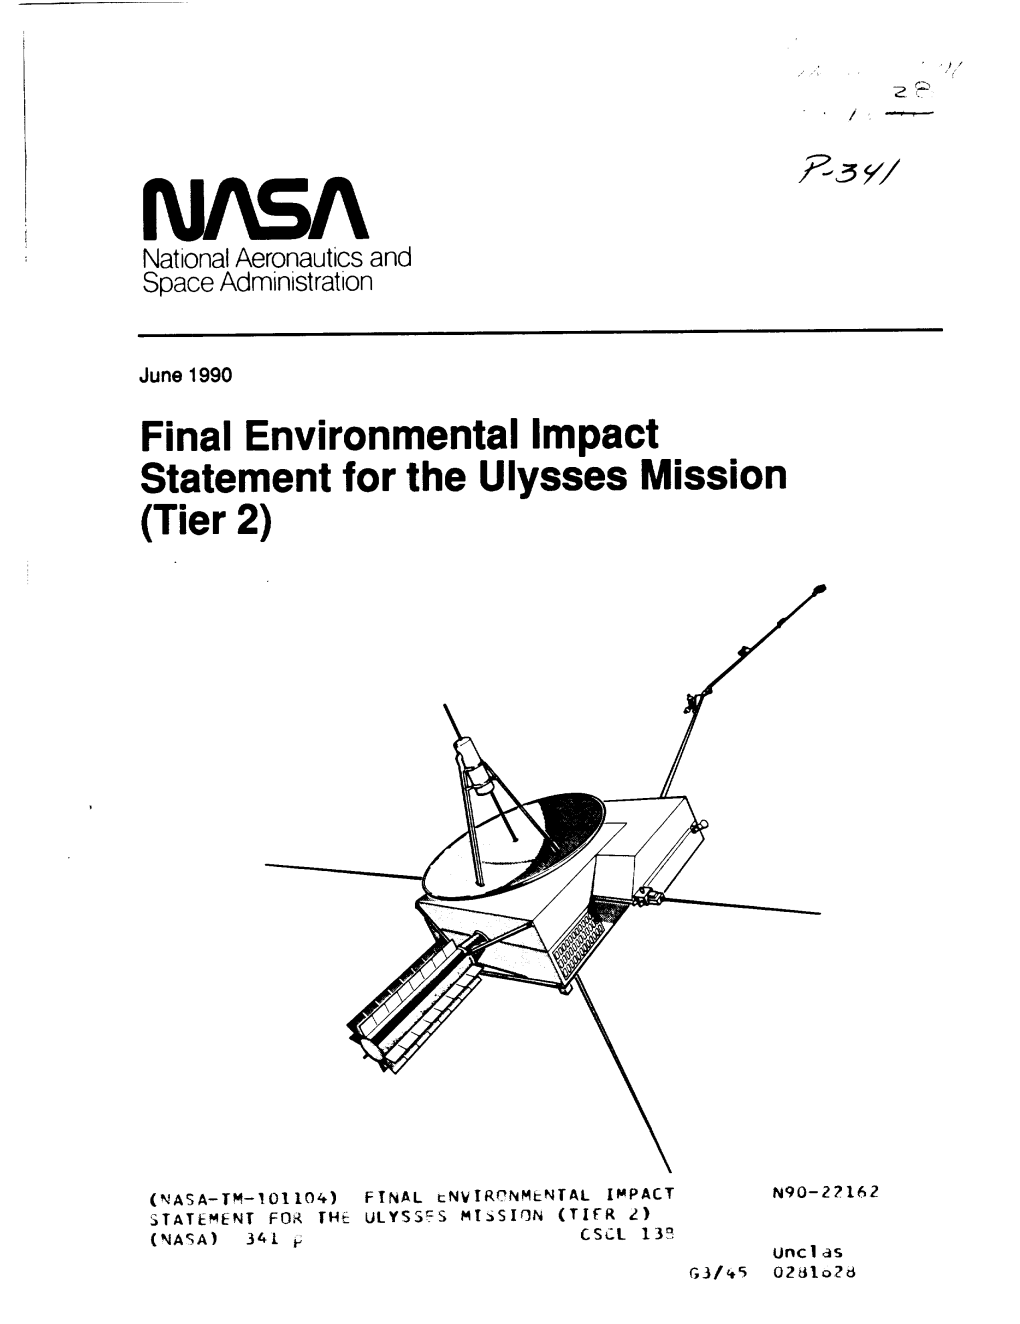 Final Environmental Impact Statement for the Ulysses Mission (Tier 2)